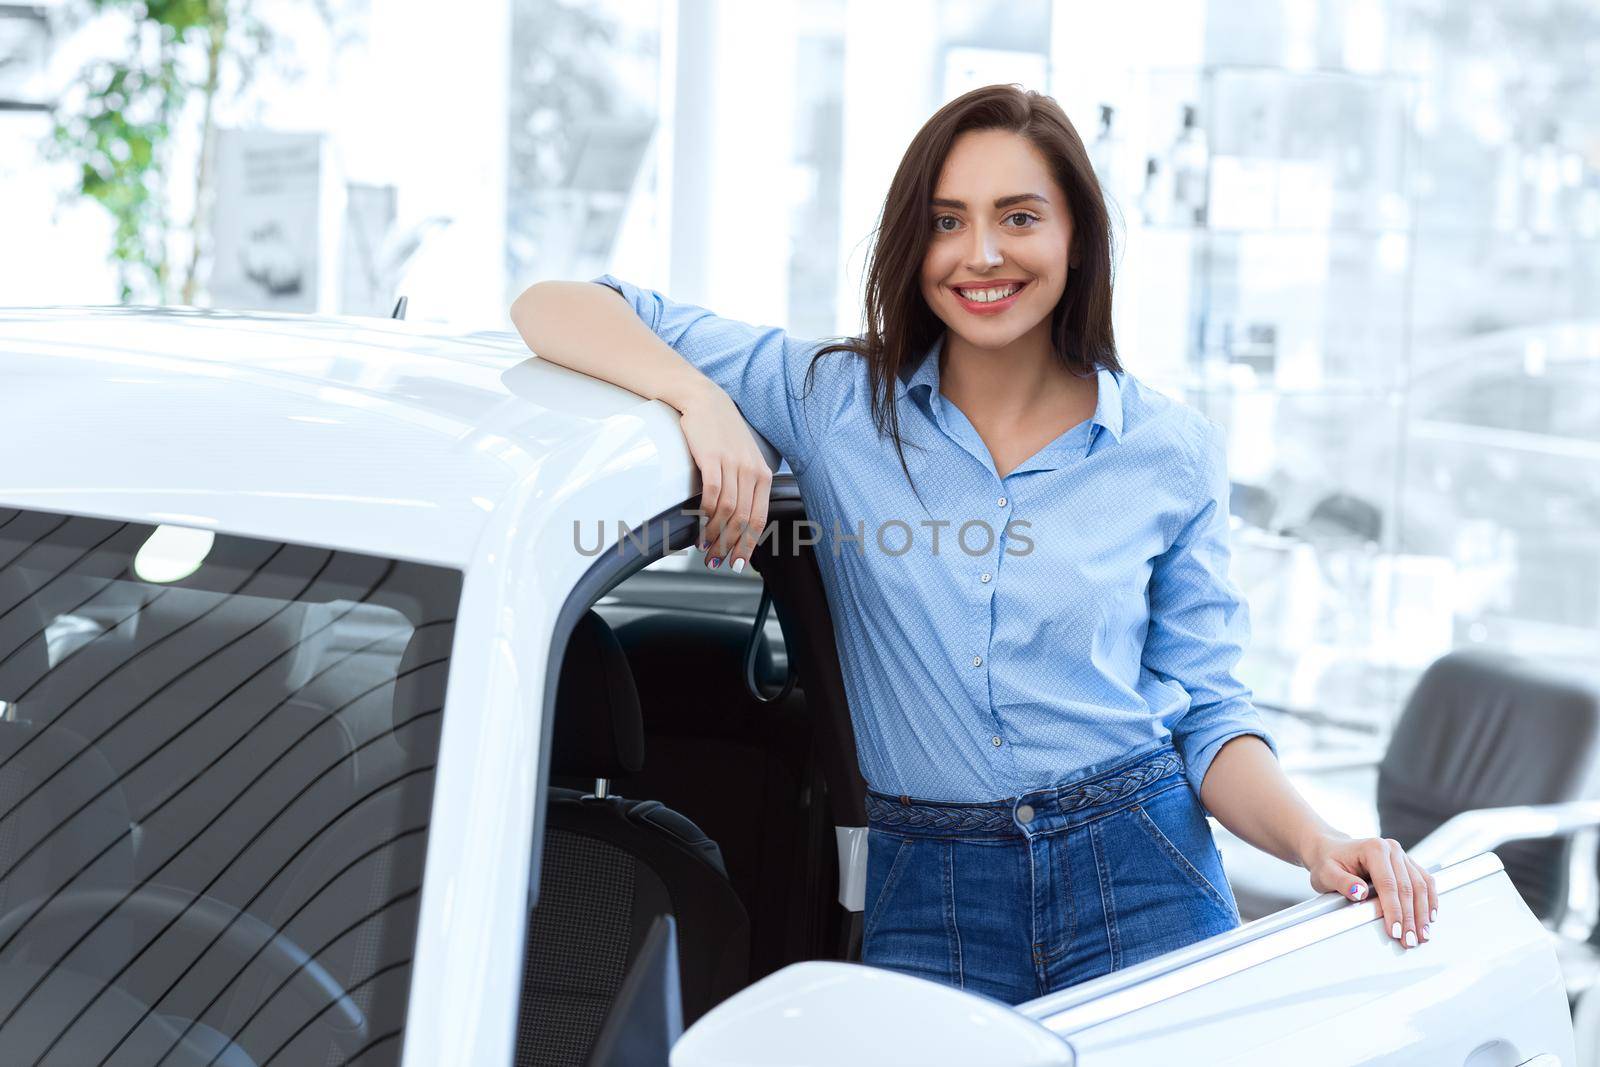 Taking it for a spin! Shot of an attractive young woman posing near her newly bought car at the car dealership copyspace on the side